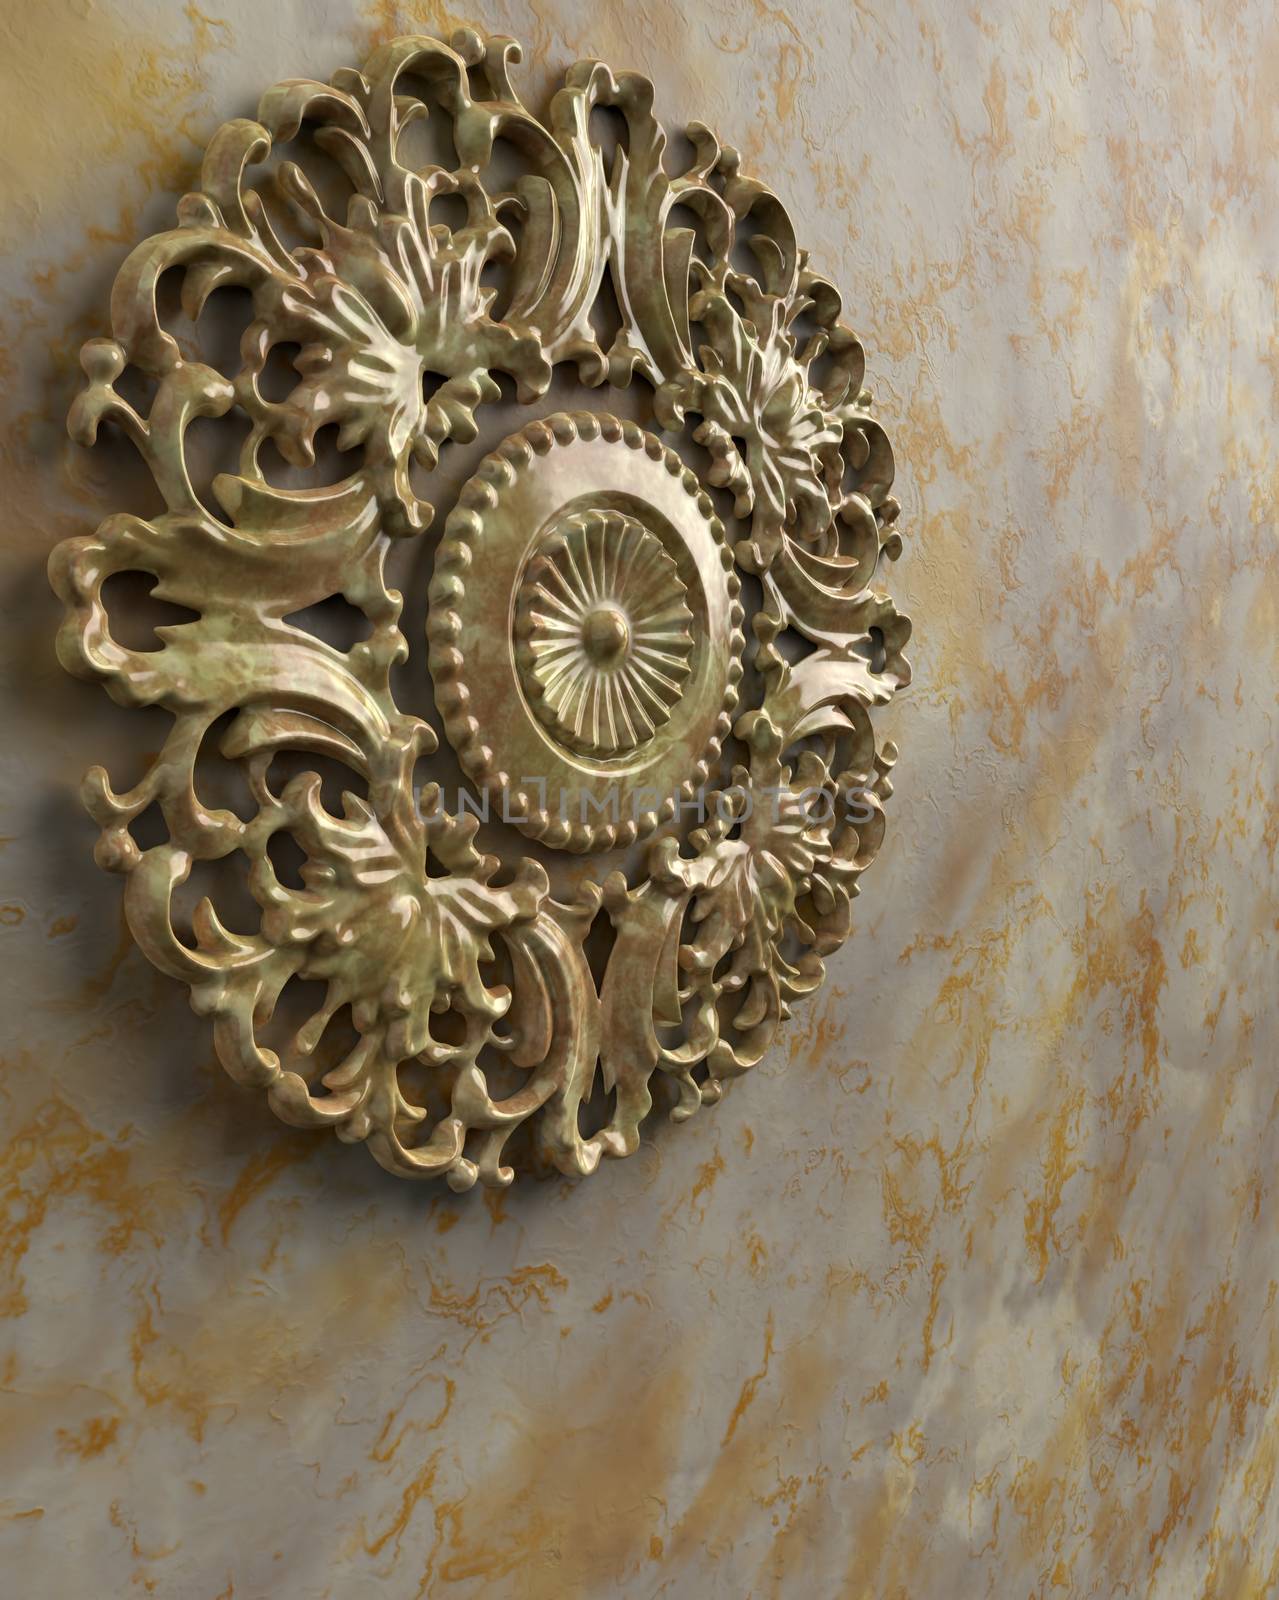 Marble wall with round stone ornament.